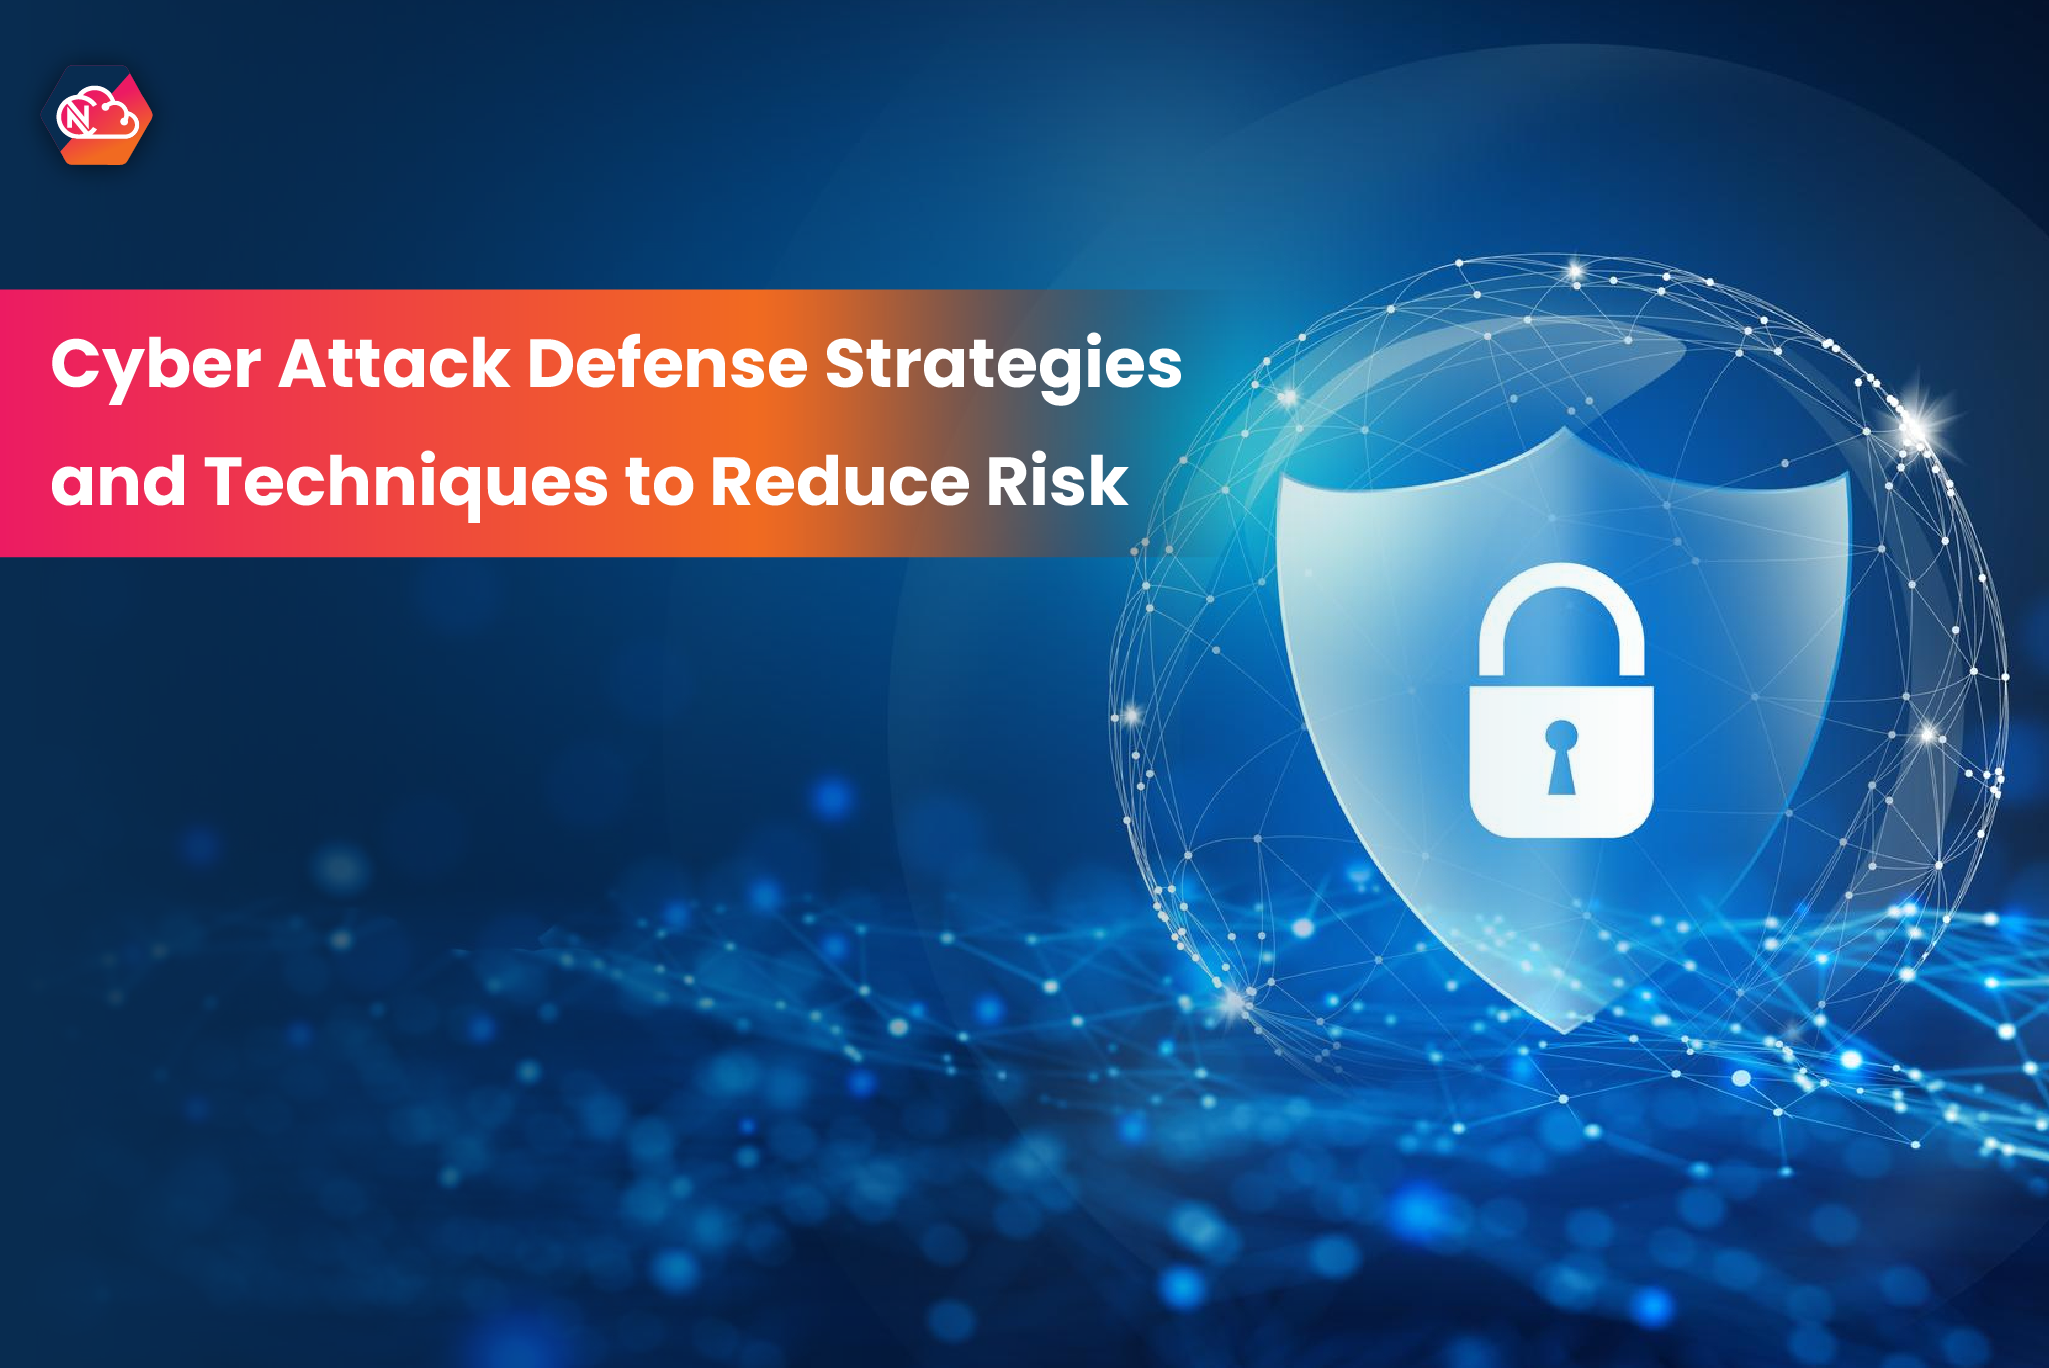 Cyber Attack Defence Strategies and Techniques to Reduce Risk